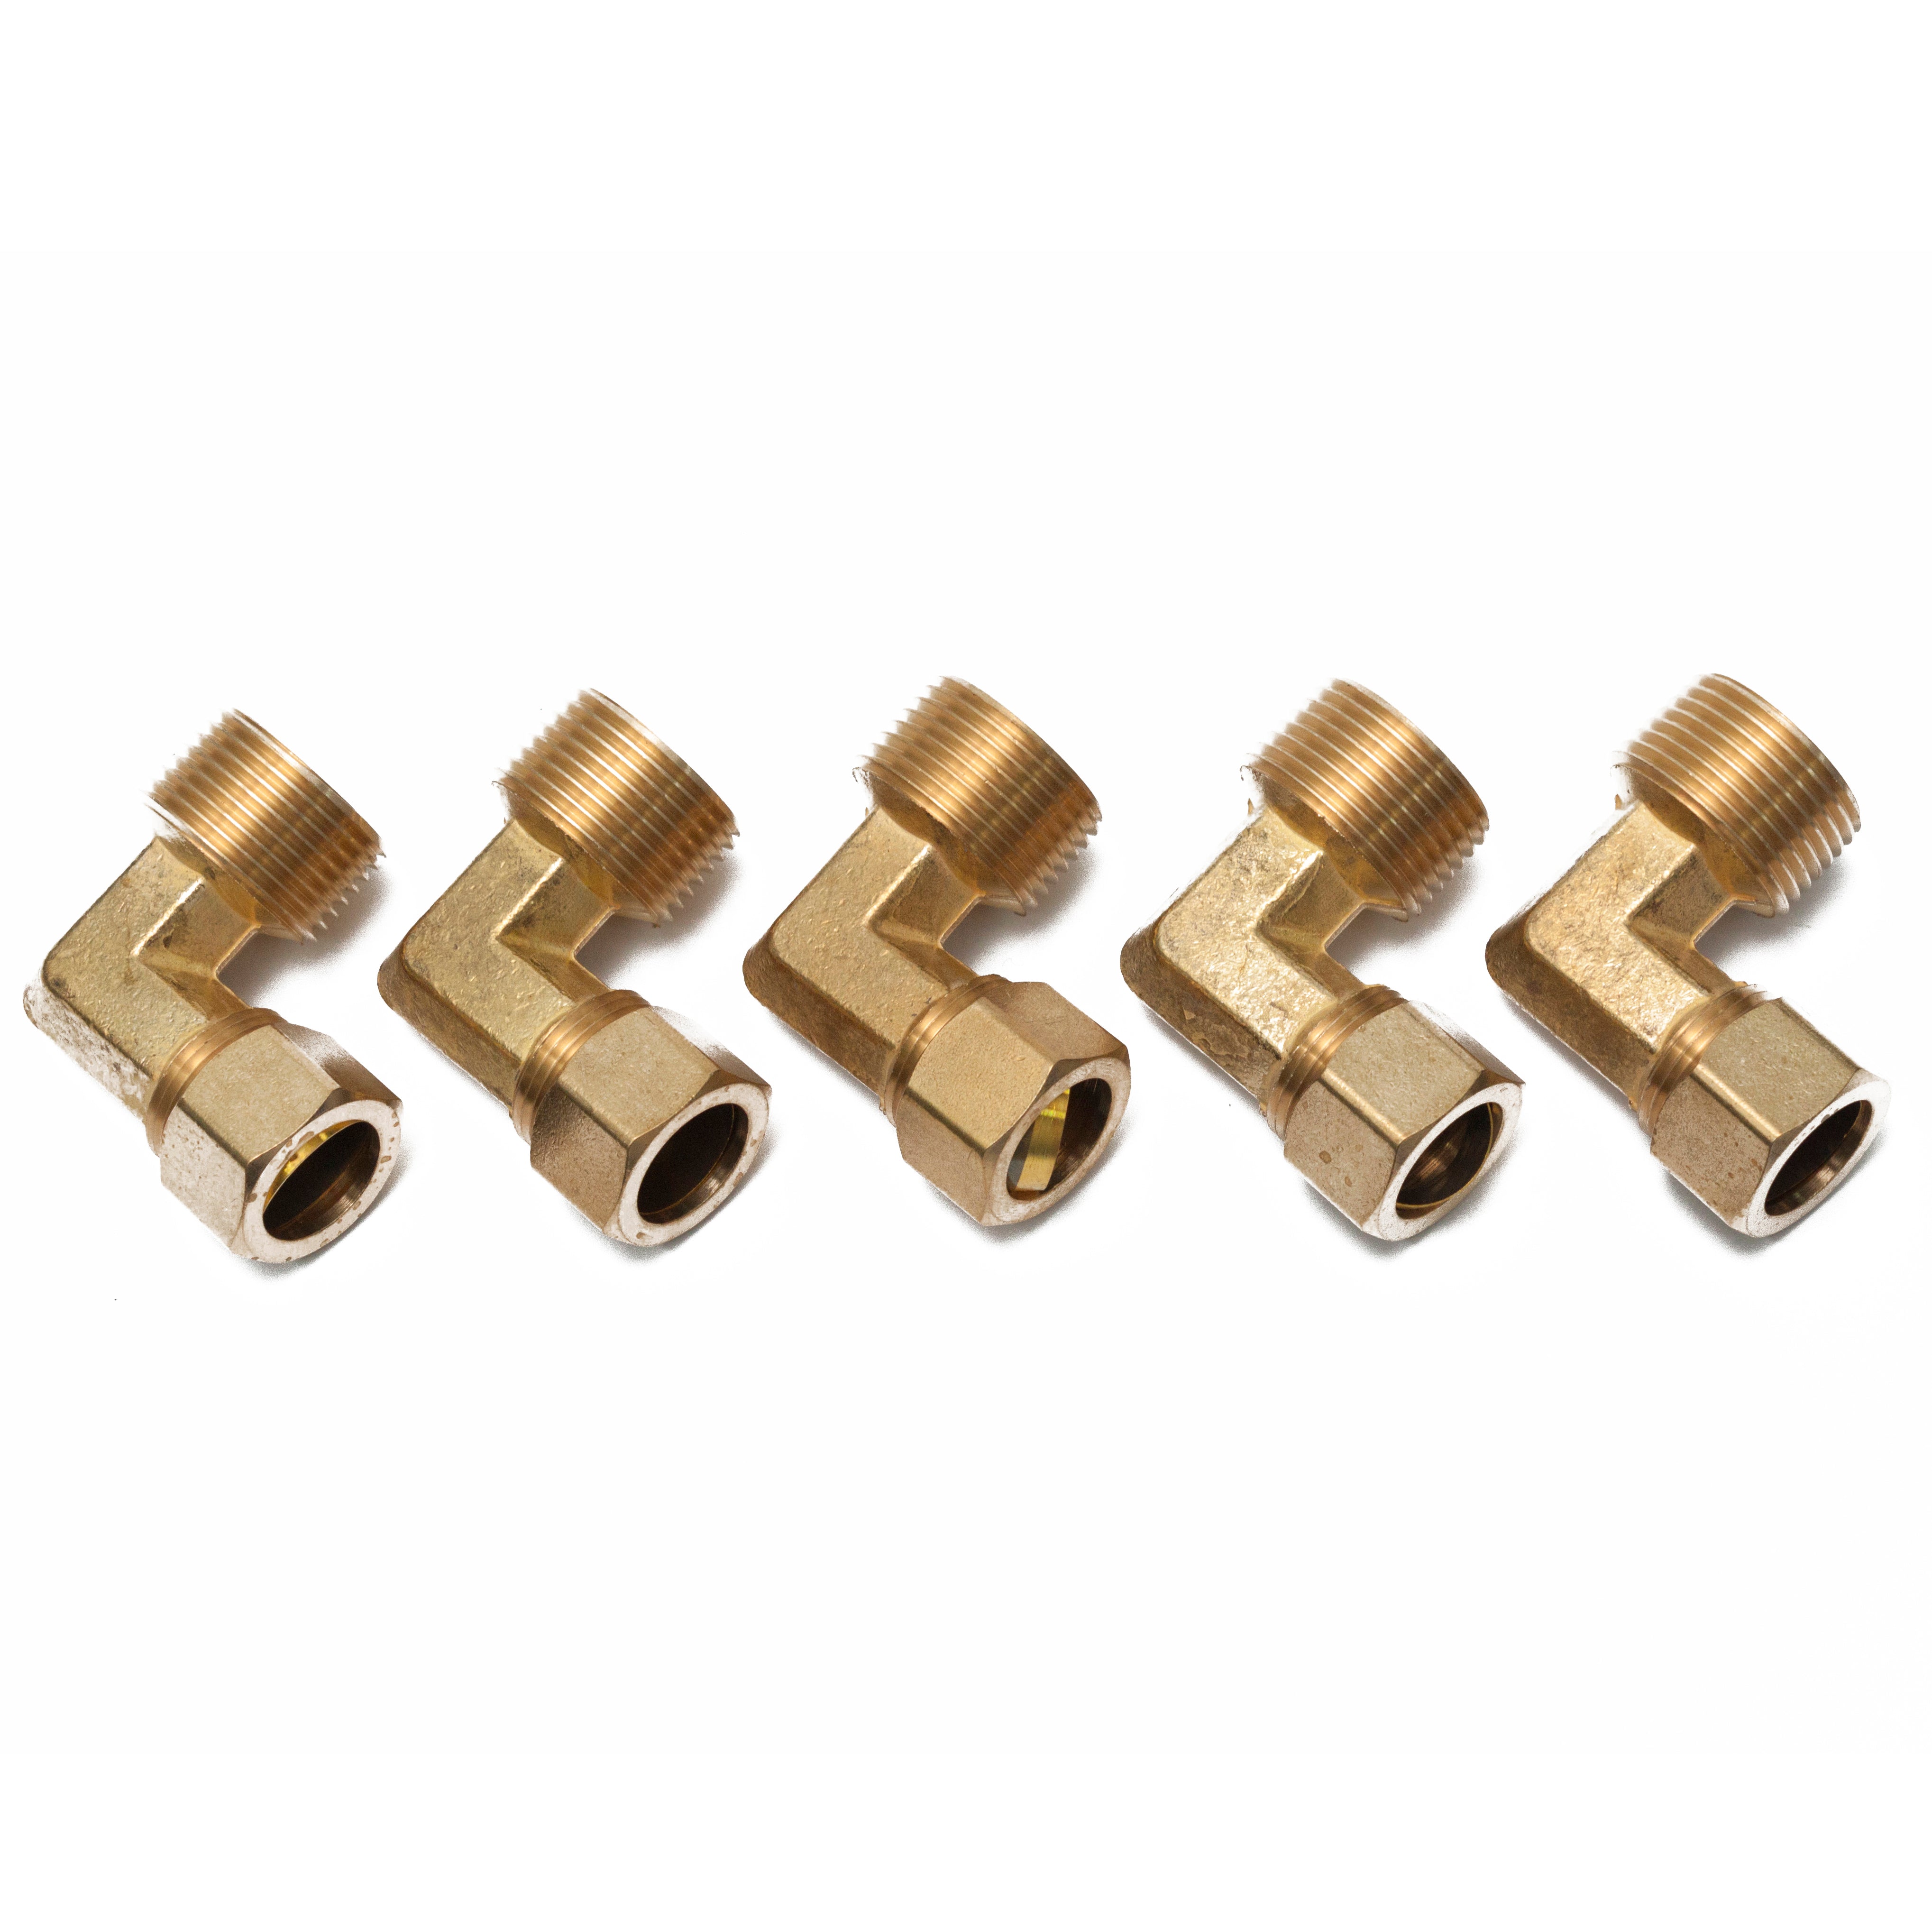 LTWFITTING 5/8-Inch OD x 3/4-Inch Male NPT 90? Compression Elbow,Brass Compression Fitting(Pack of 5)